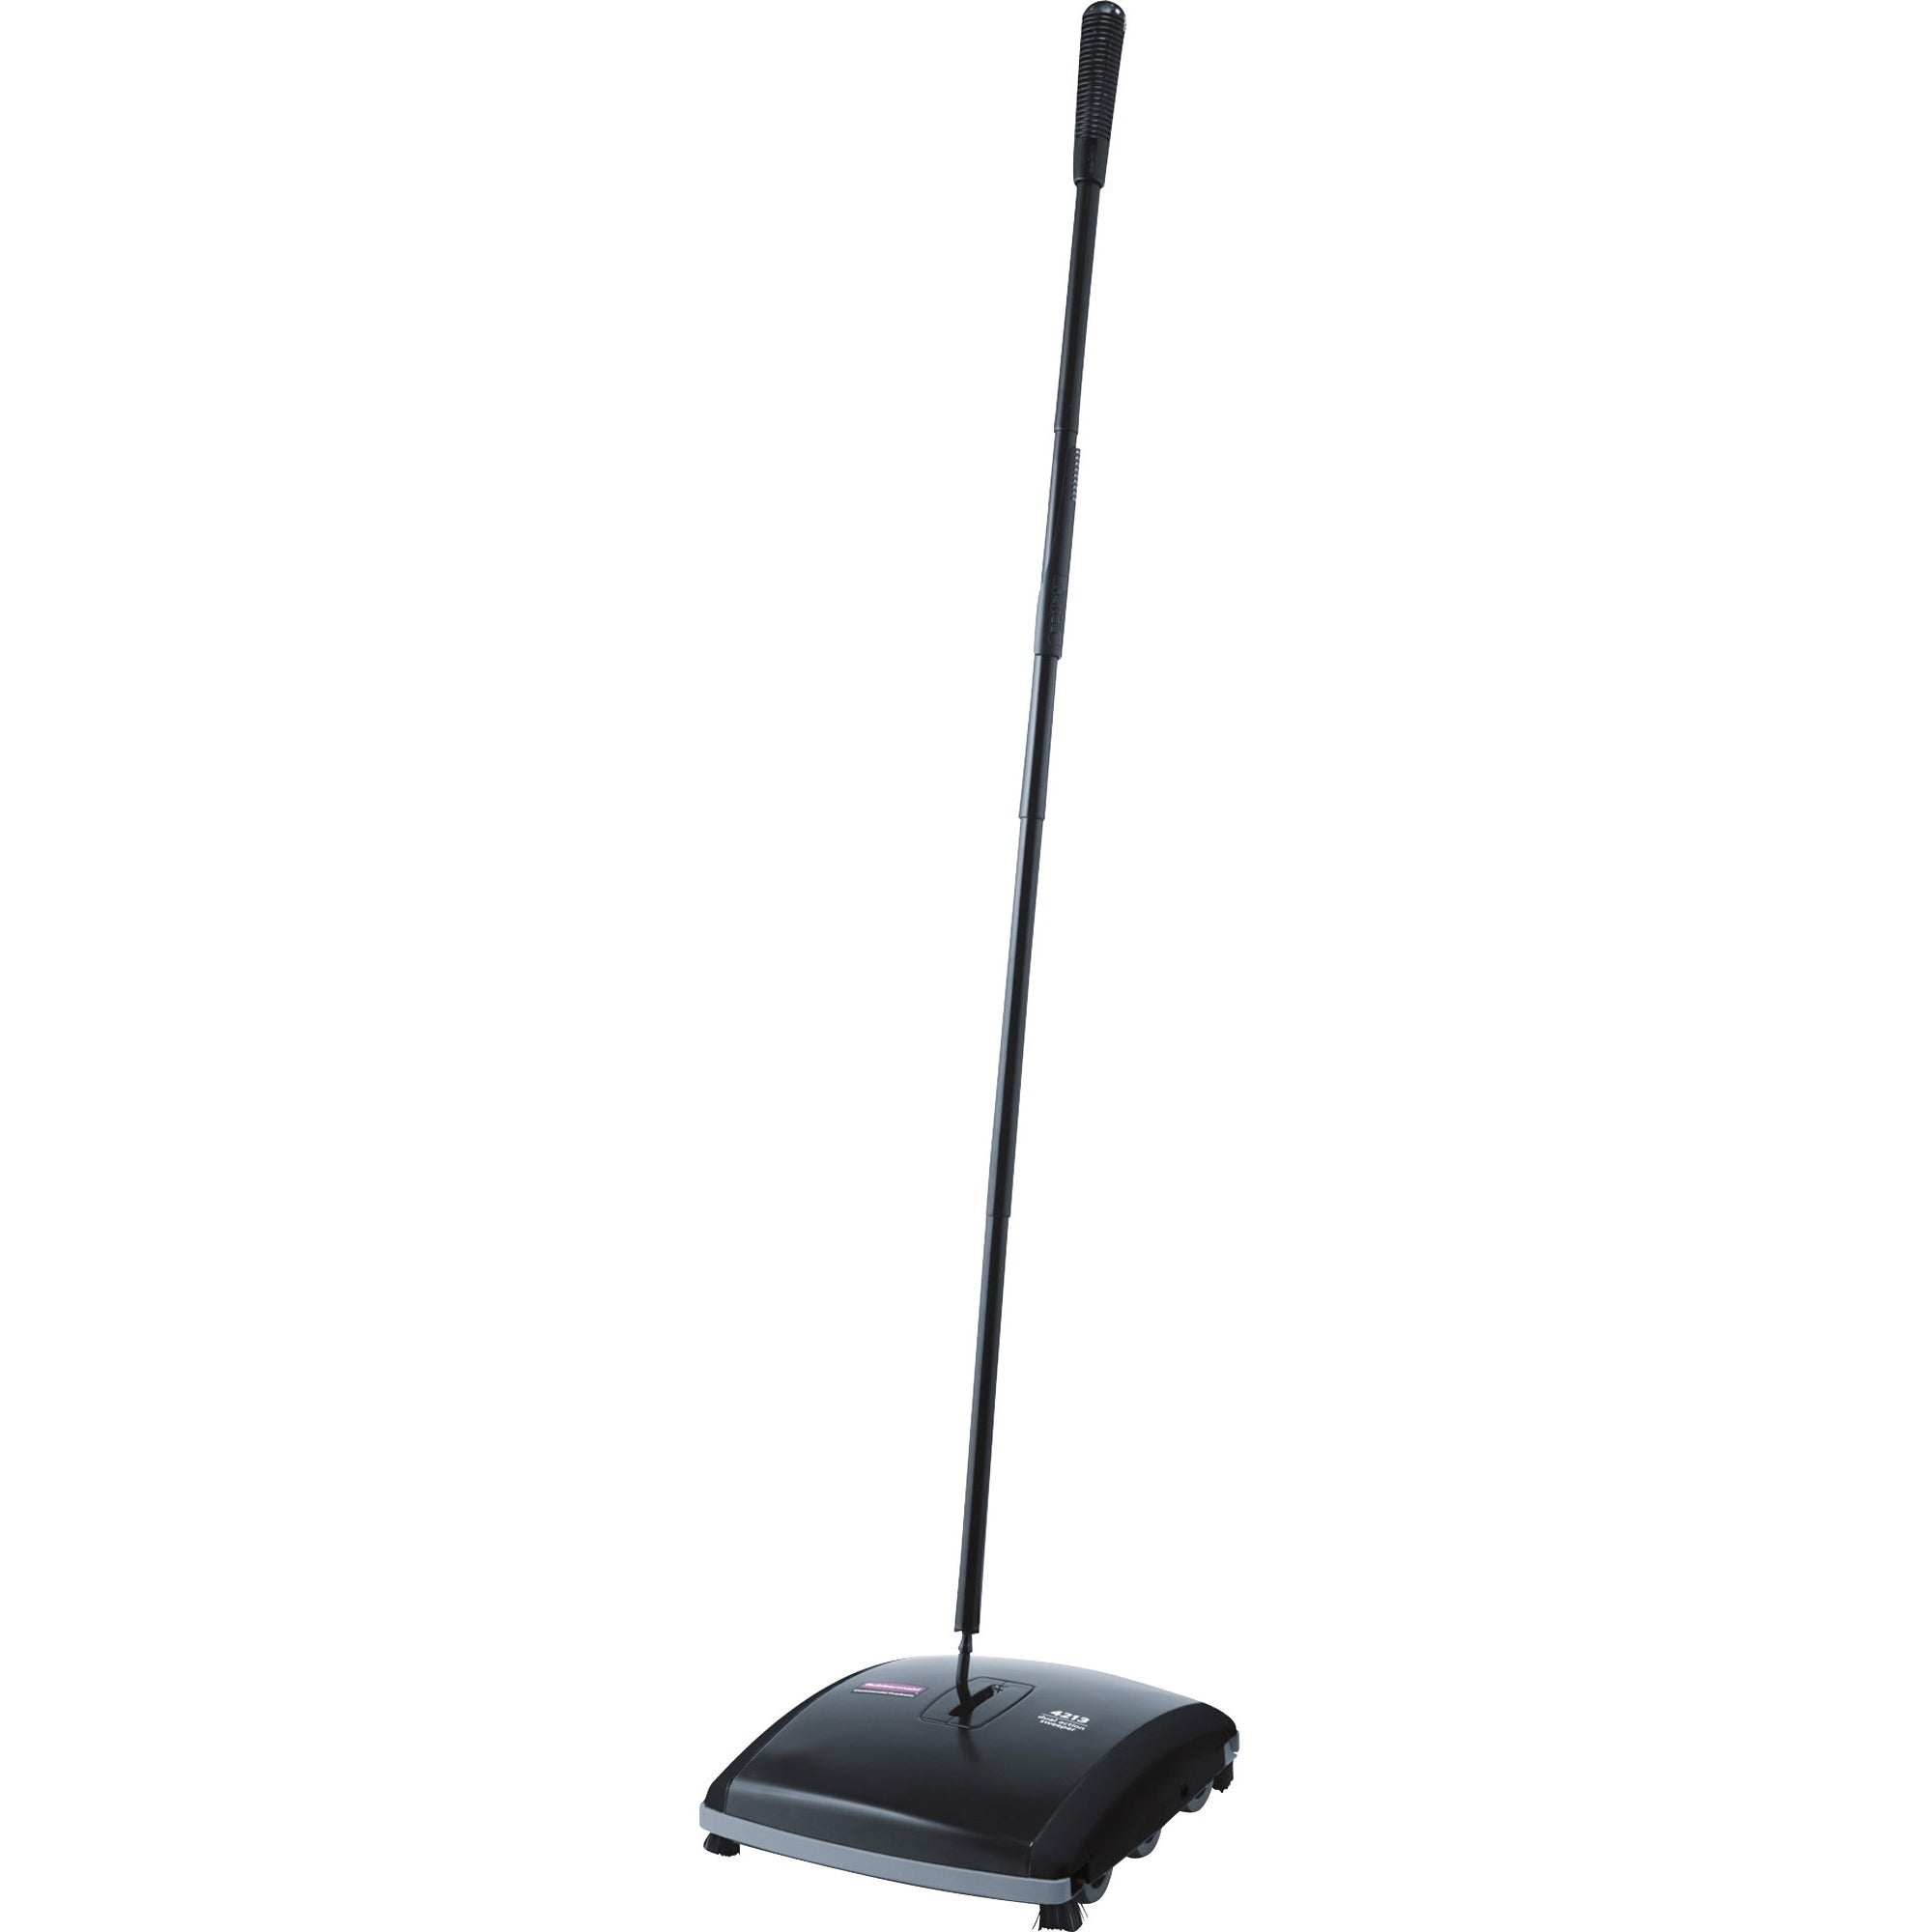 rubbermaid-commercial-dual-action-sweeper-750-brush-face-42-handle-length-105-overall-length-4-carton-black_rcp421388bkct - 1